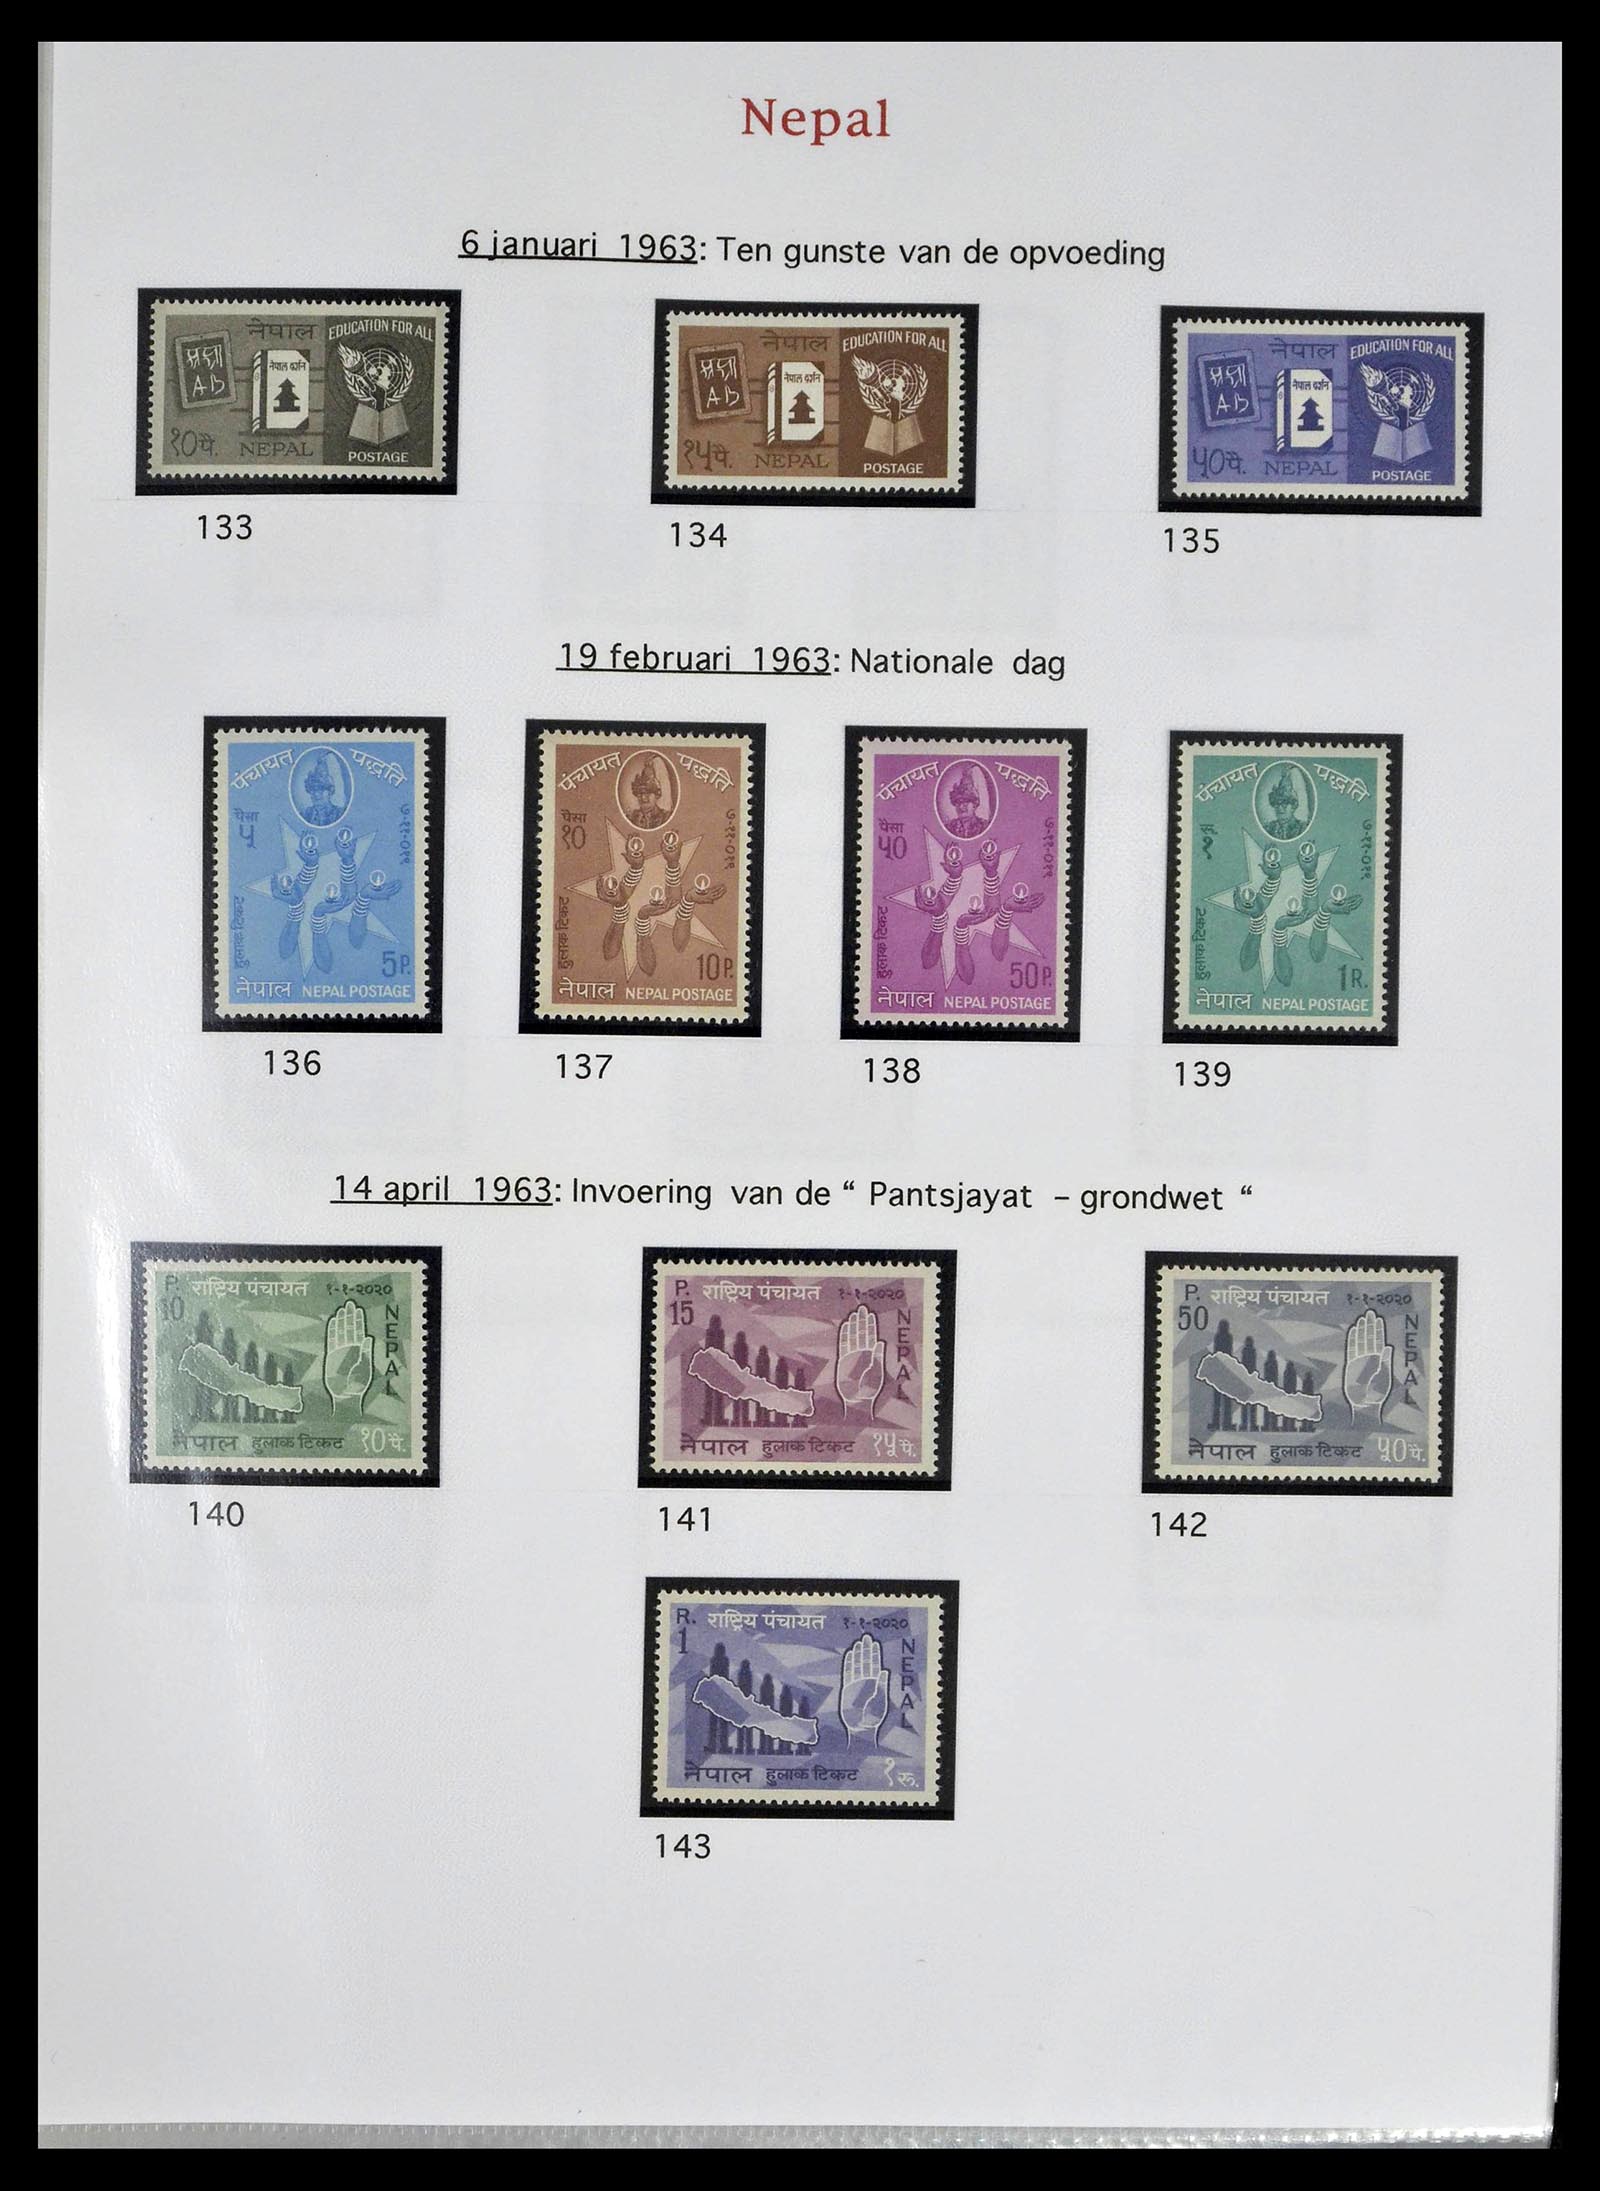 39313 0016 - Stamp collection 39313 Nepal 1881-1999.